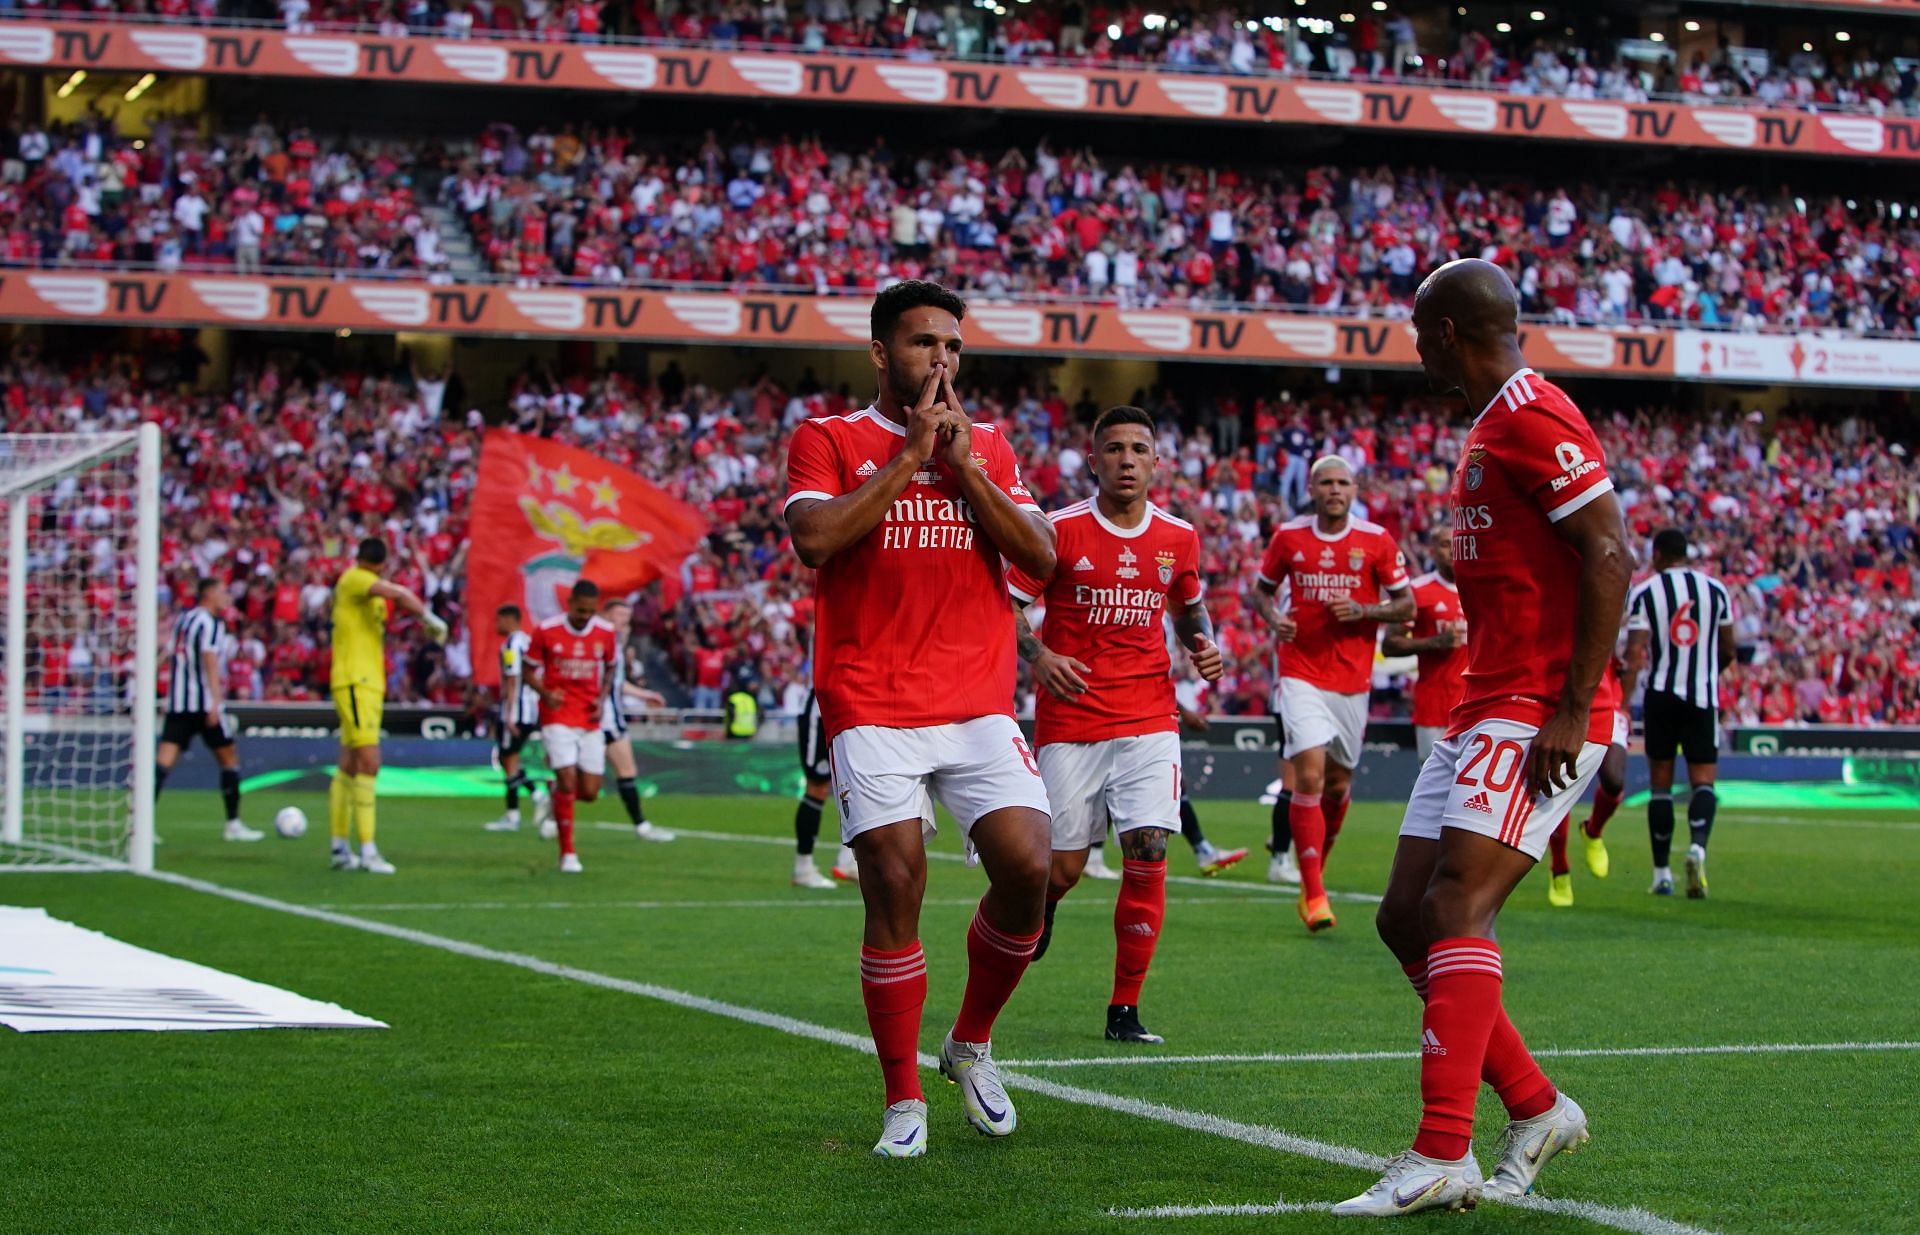 Benfica get their Primeira Liga campaign underway on Friday